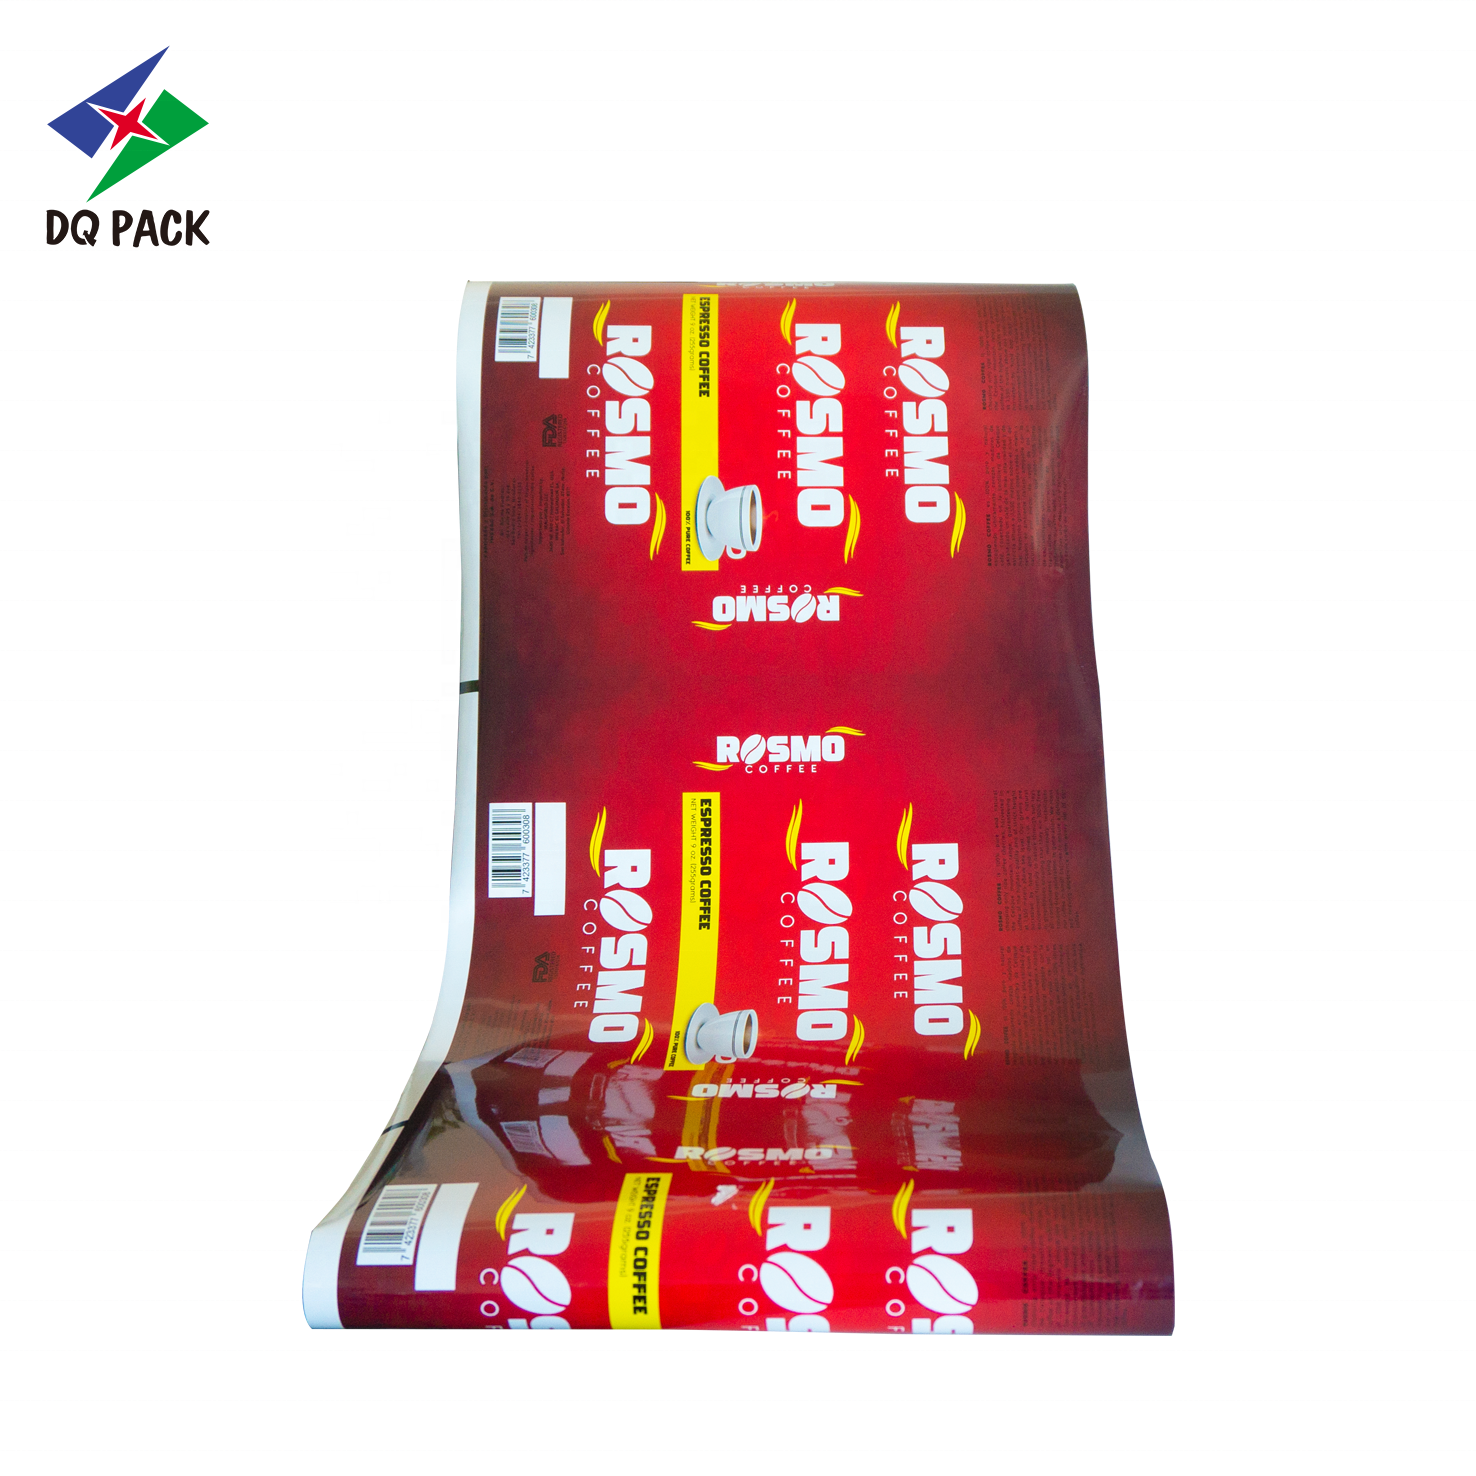 DQ PACK China Supplier Chemical Clean Shampoo Roll Stock Film Laundry detergent Packaging Film